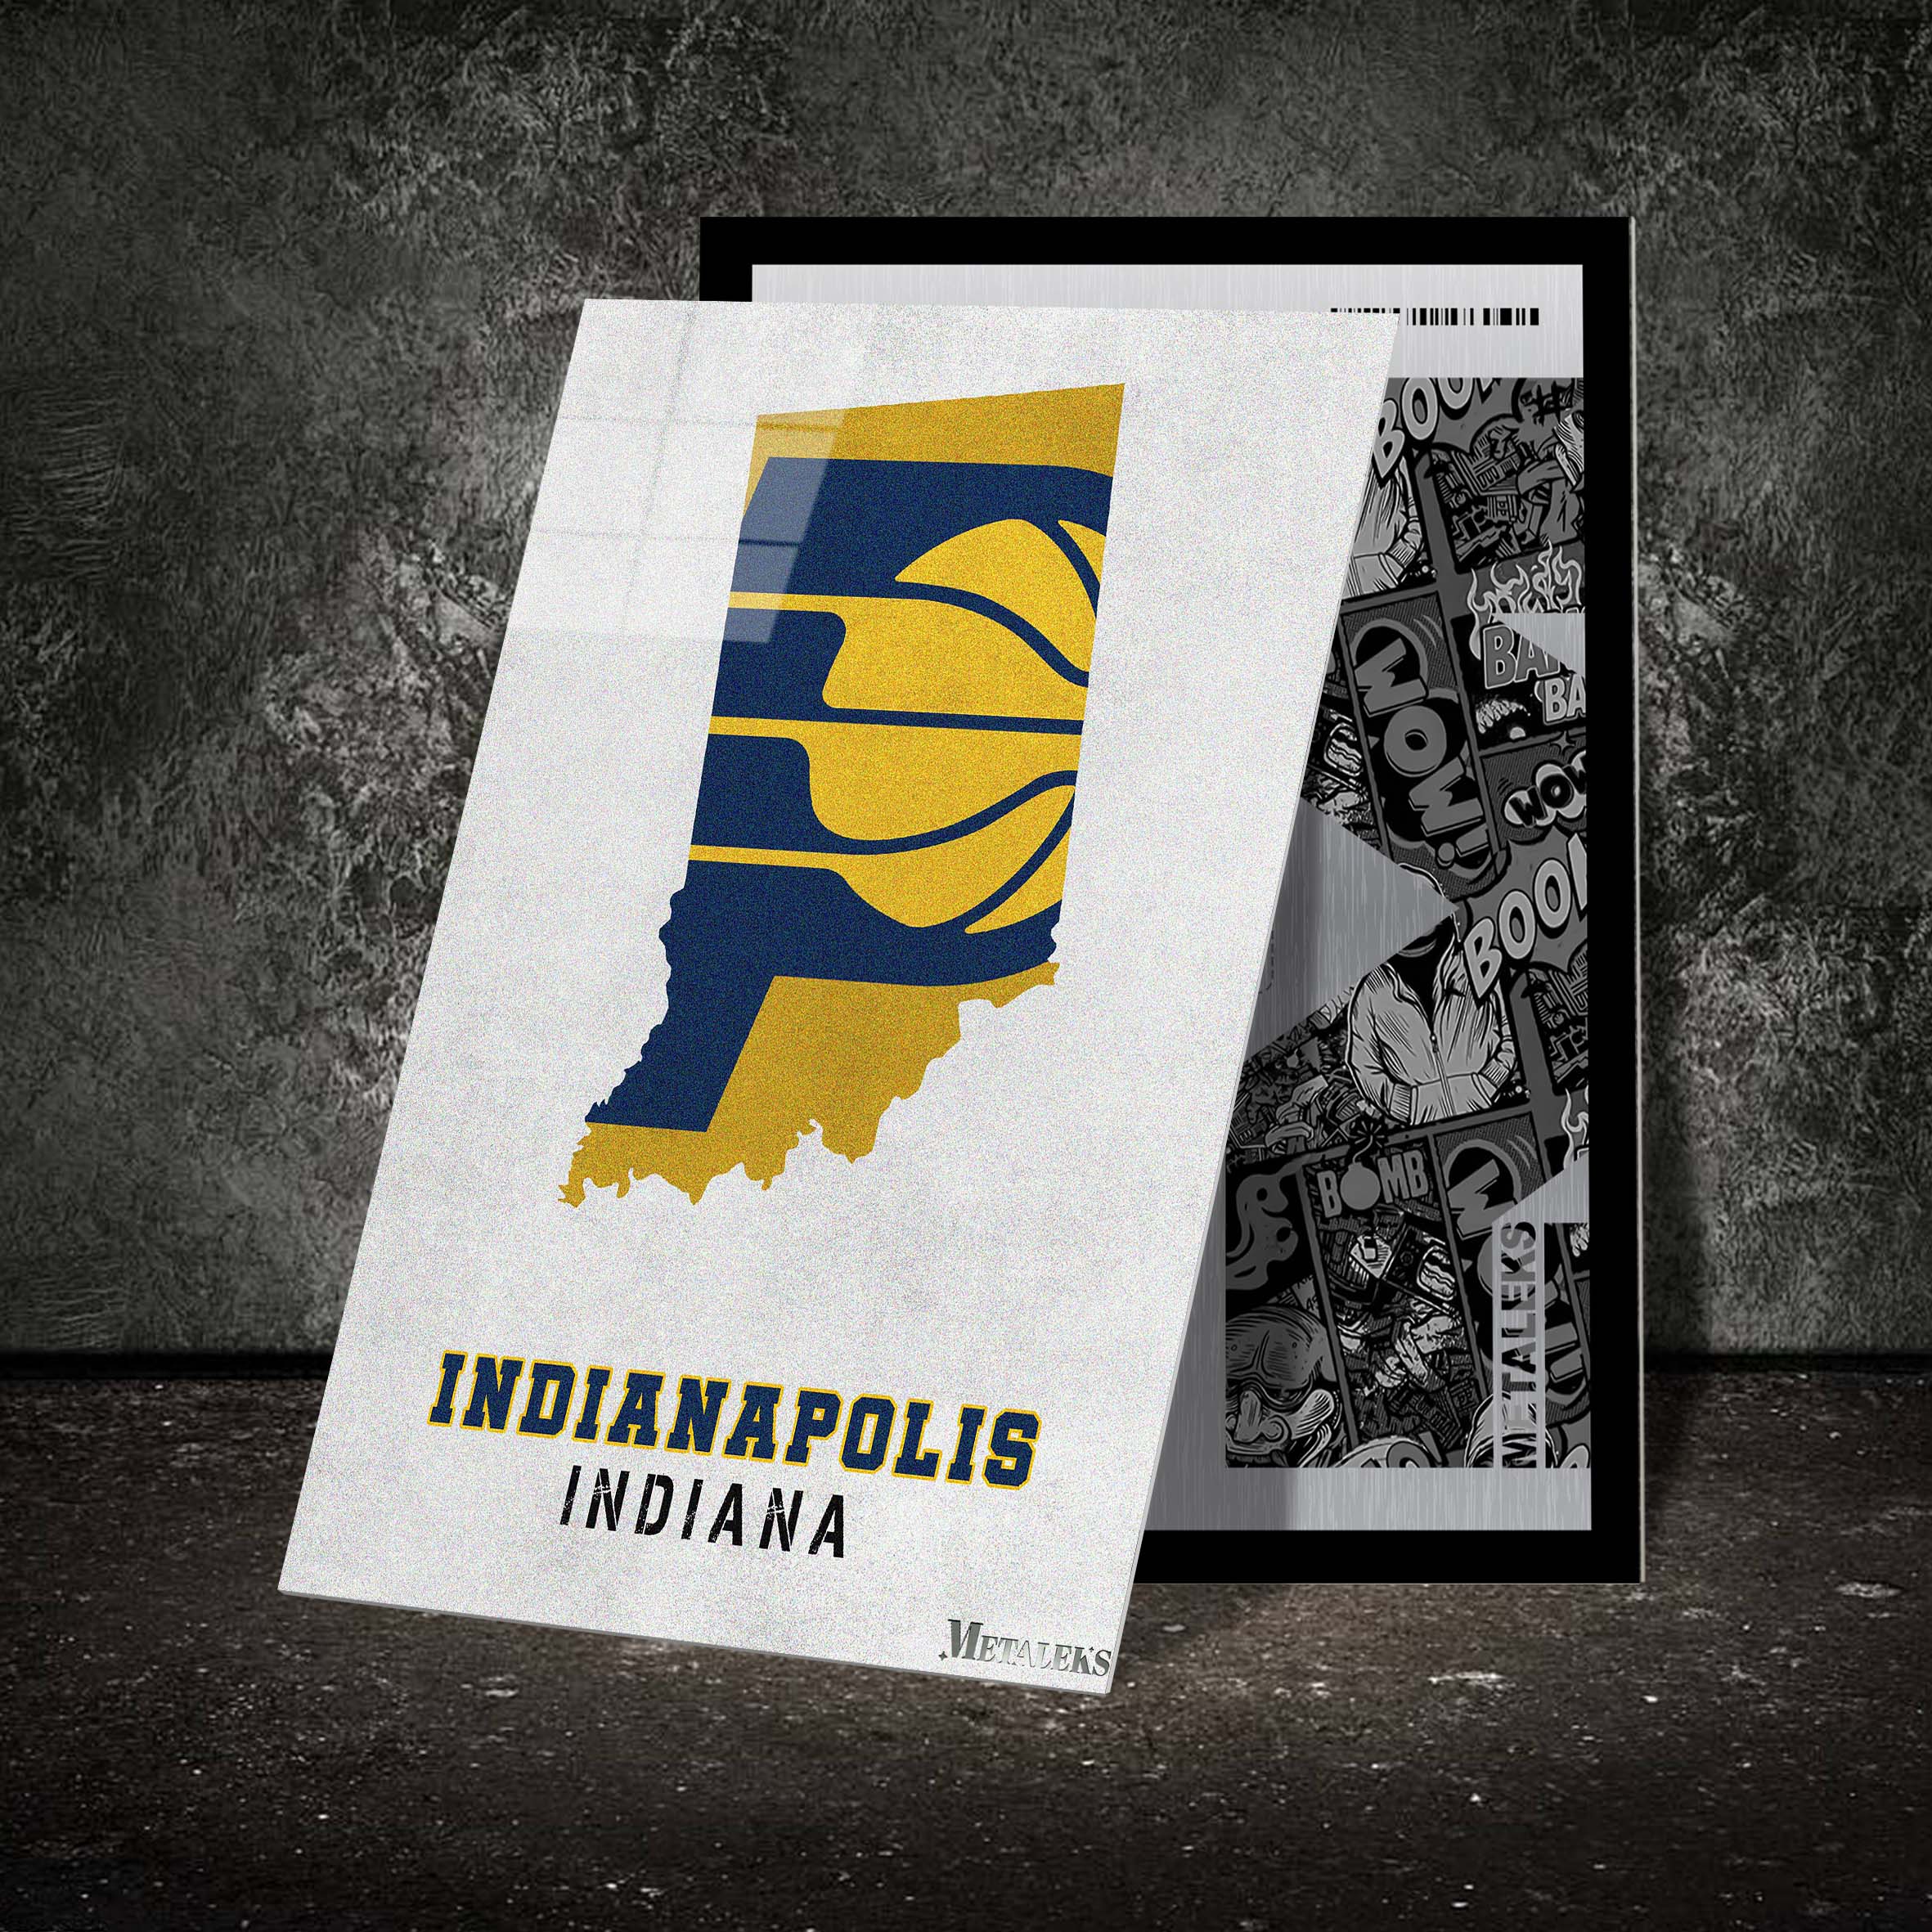 Indiana Pacers-designed by @Hoang Van Thuan